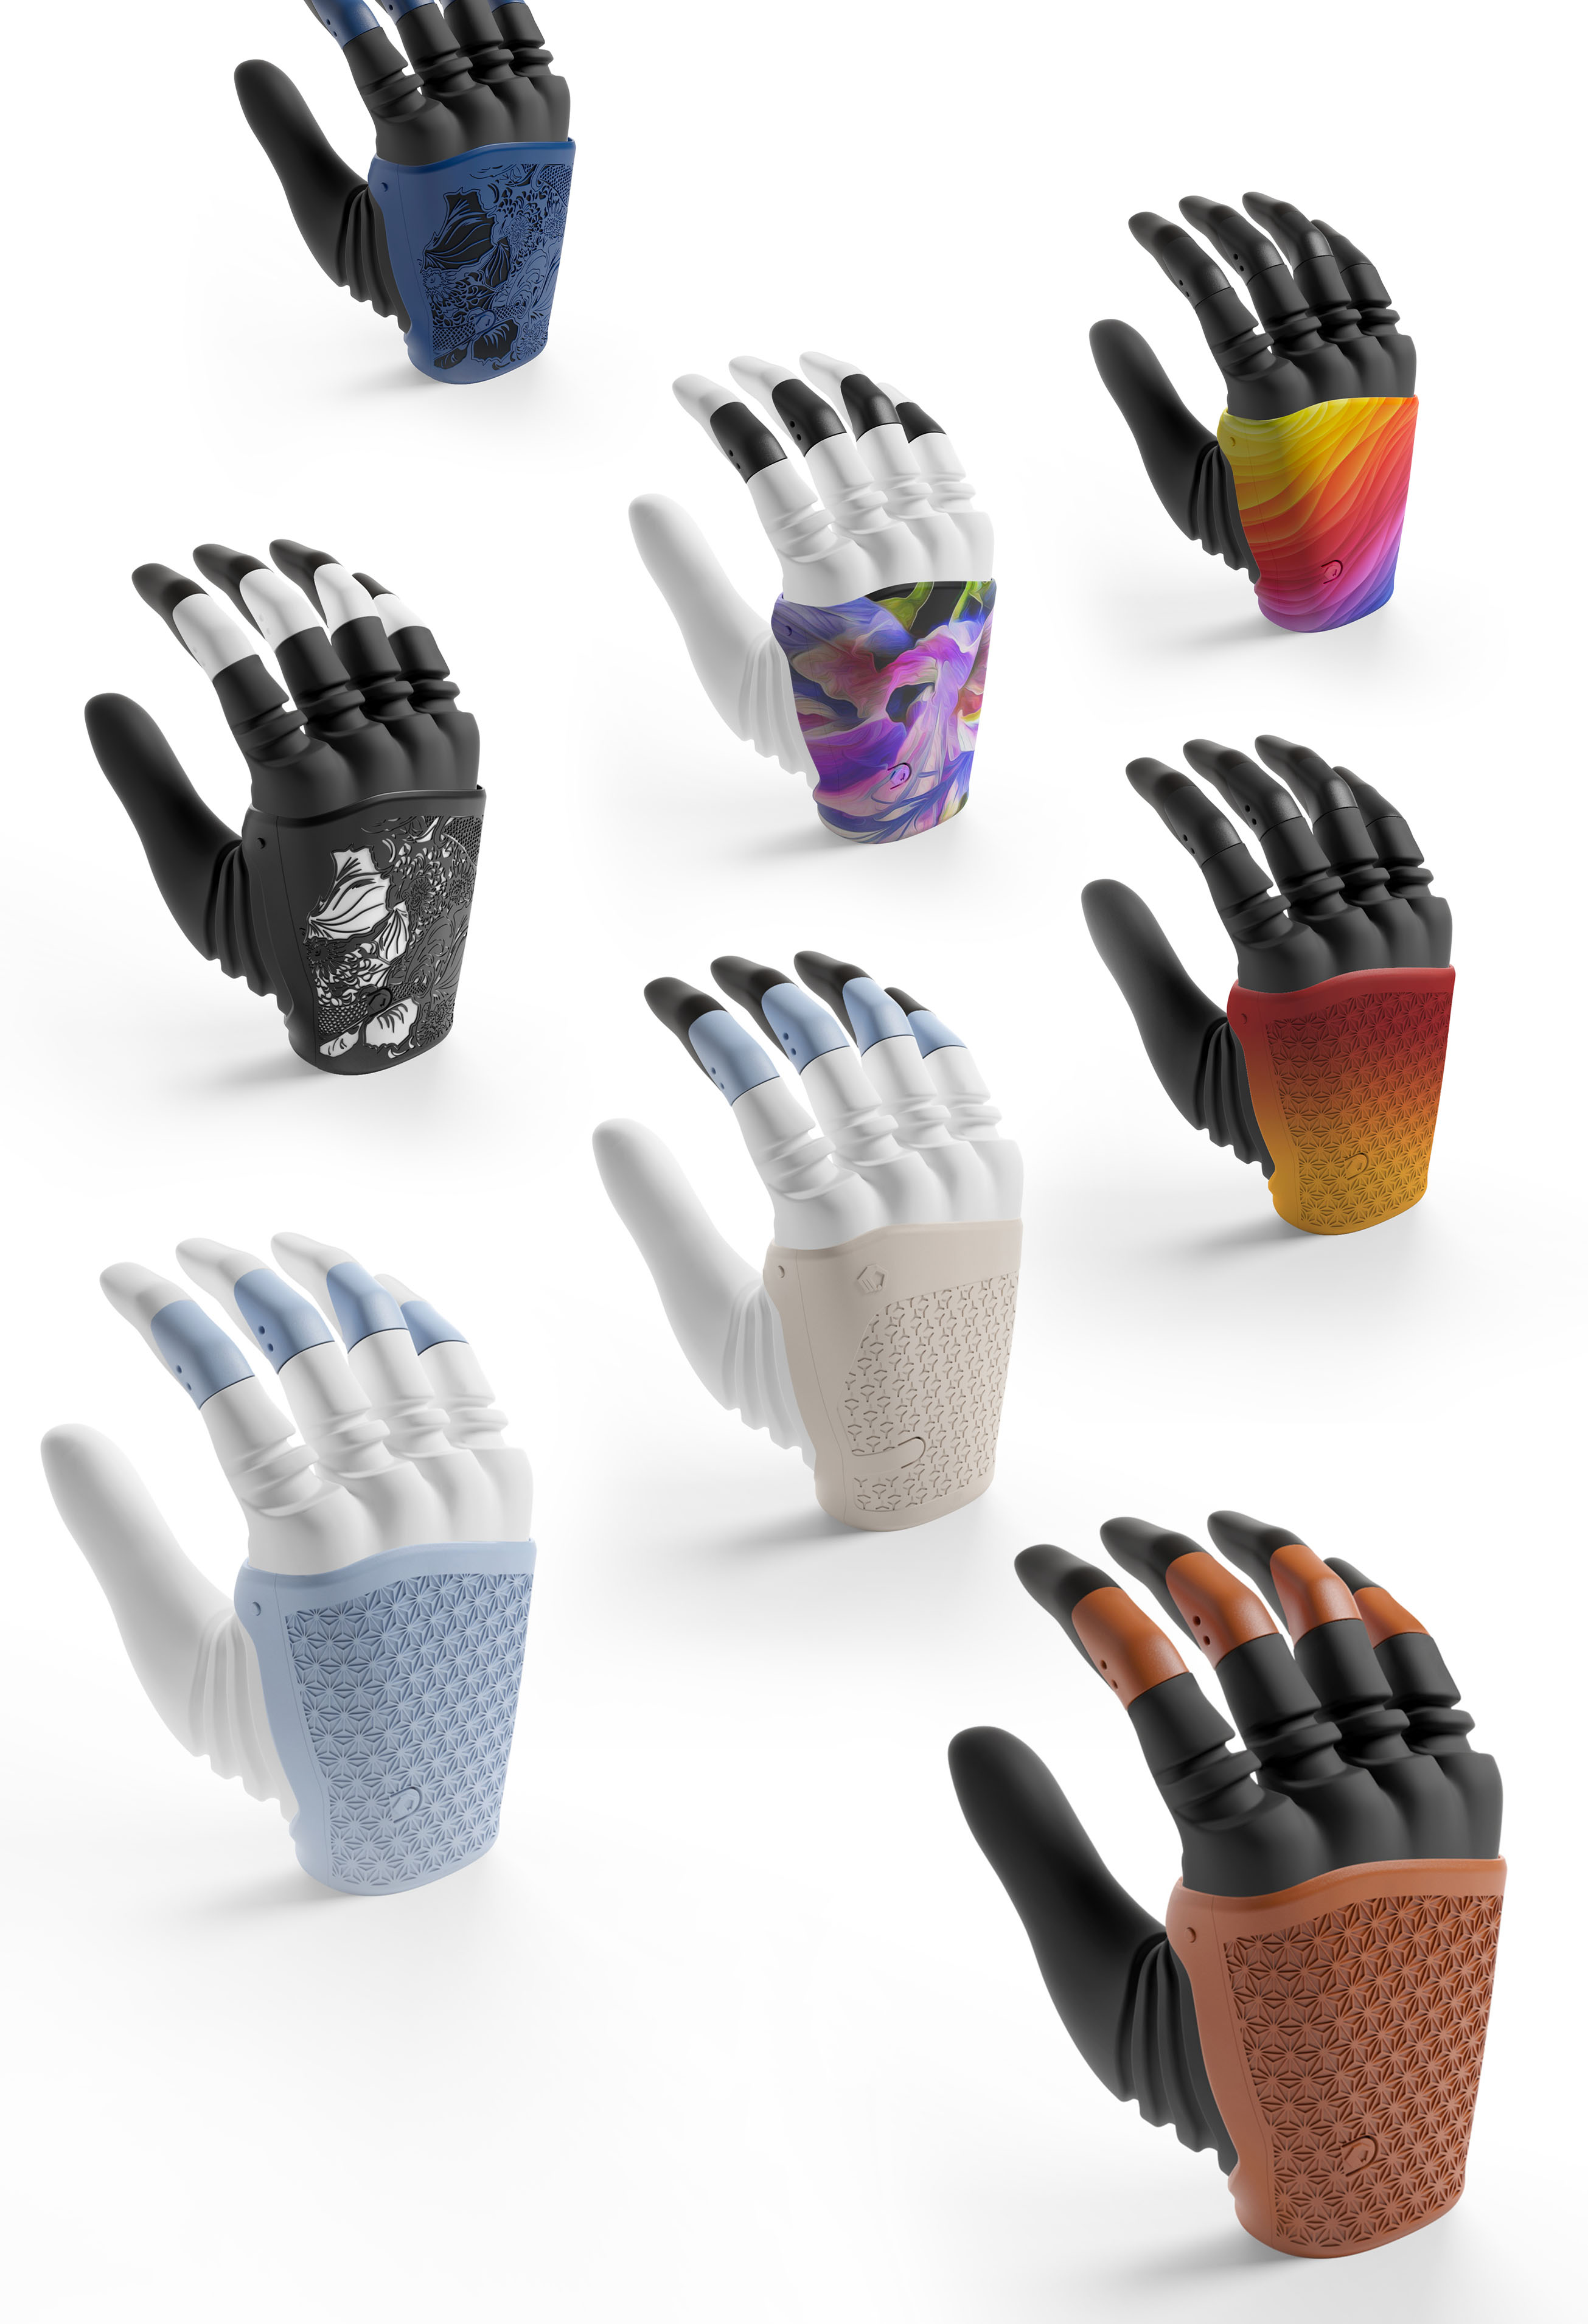 International awards: Mia Hand, the robotic hand developed by Prensilia, a  spin-off of Scuola Superiore Sant'Anna, is among the winners of the Compasso  d'Oro 2022, the Italian industrial design award